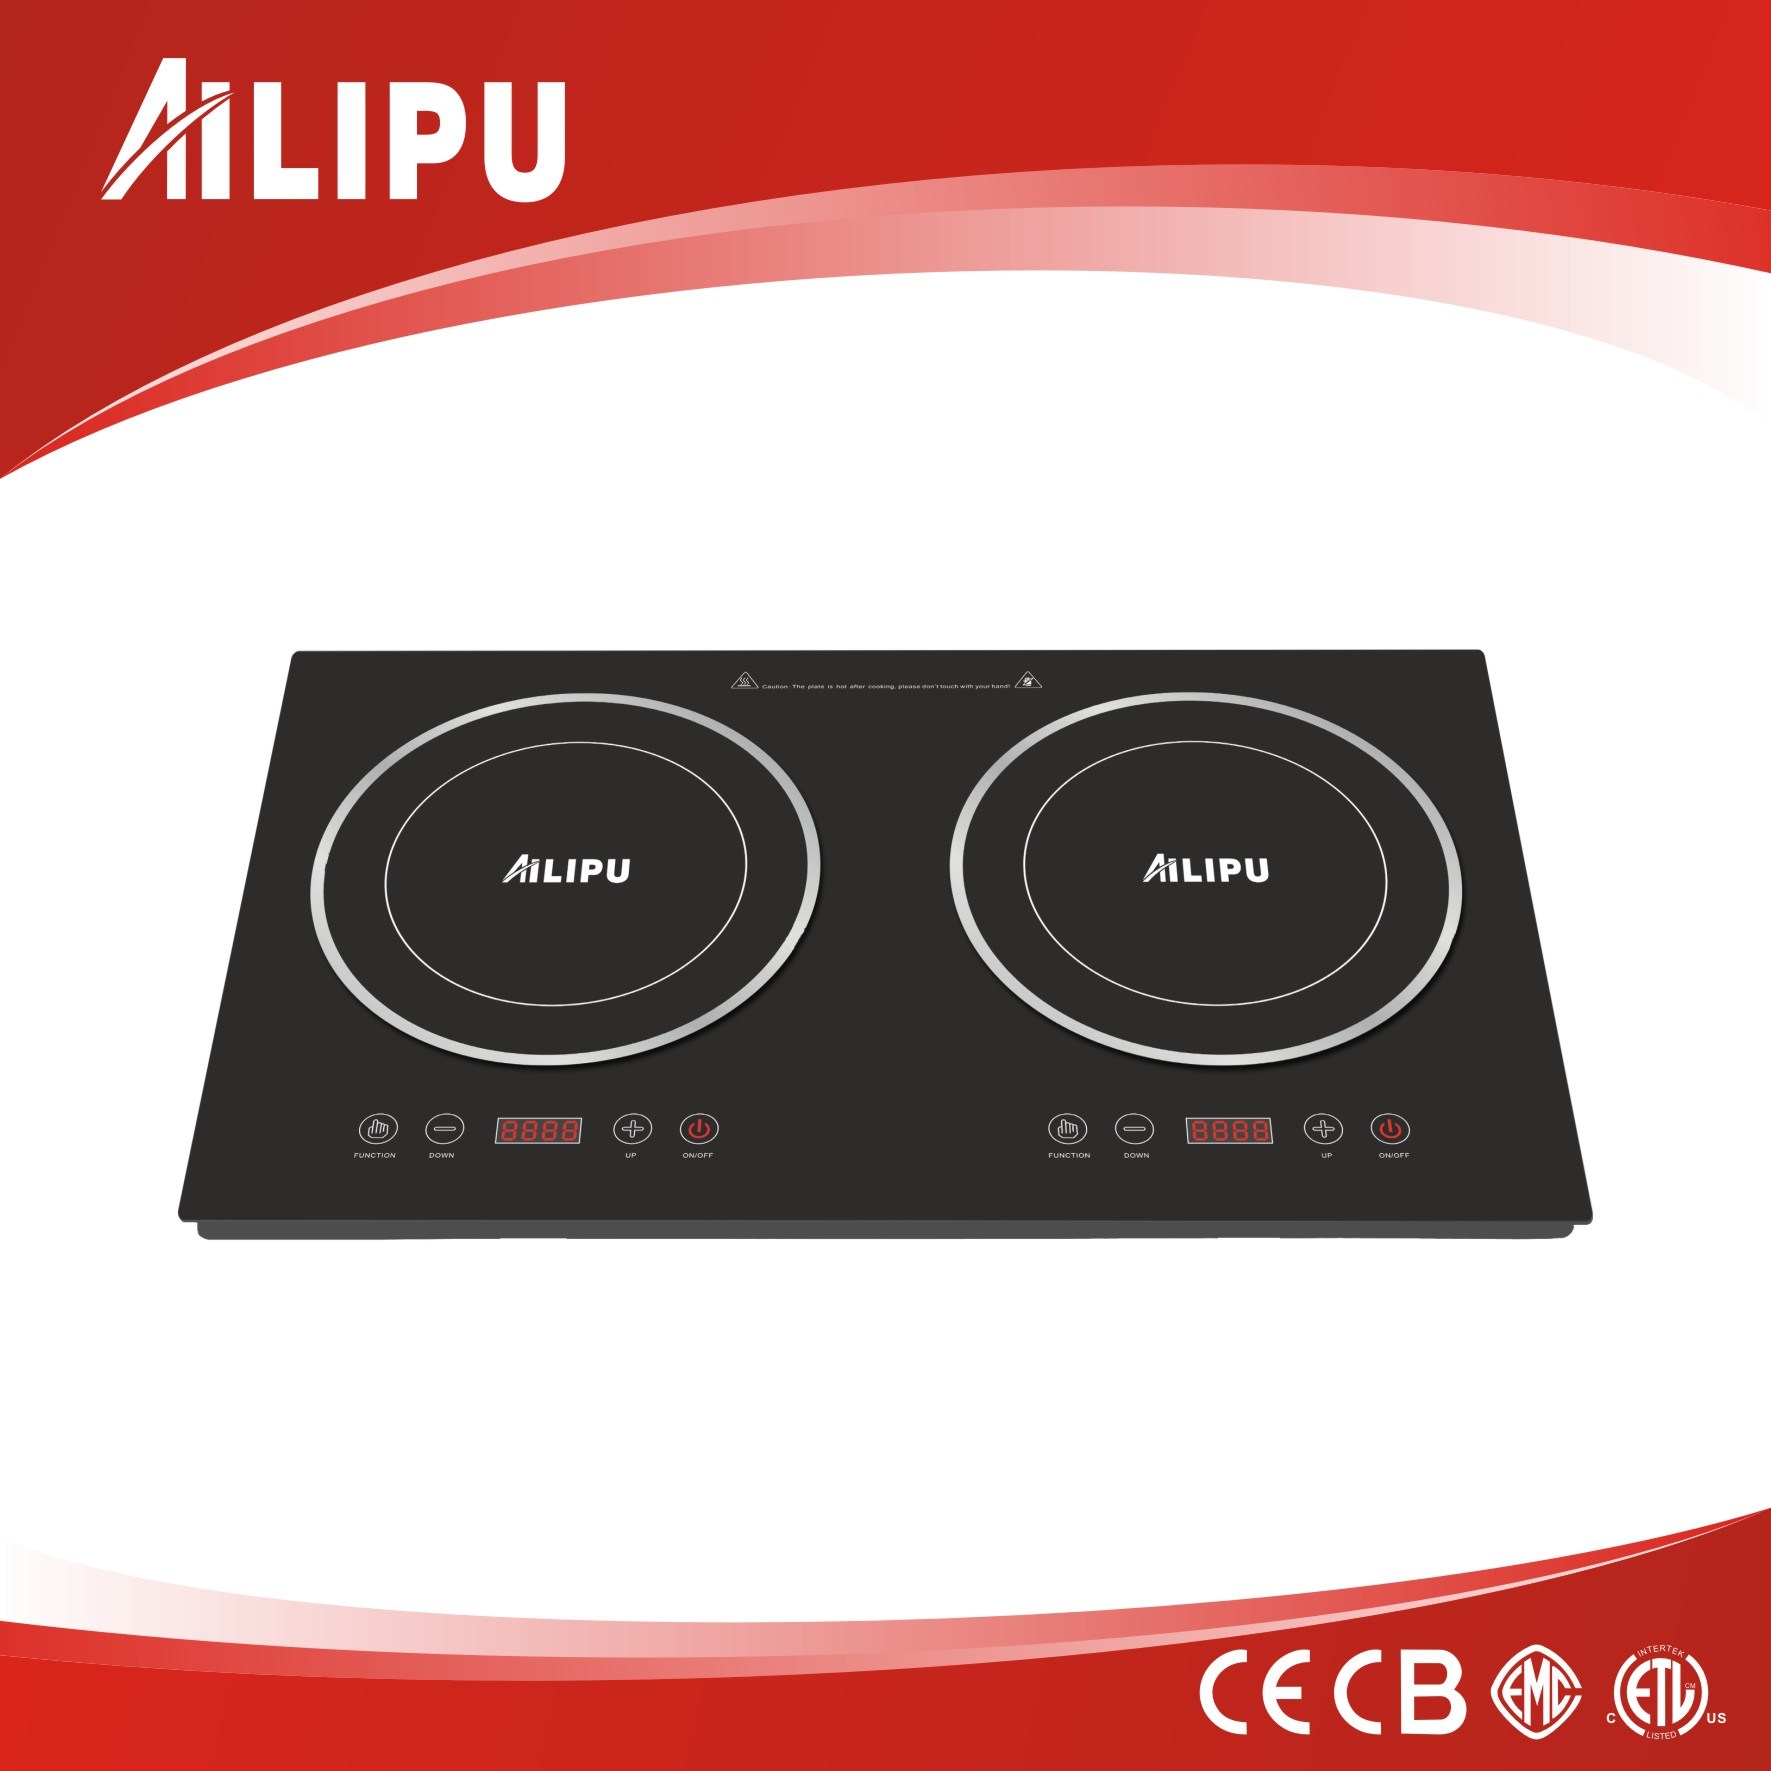 3600W Double Burner Induction Cooktop with CB CE Certification